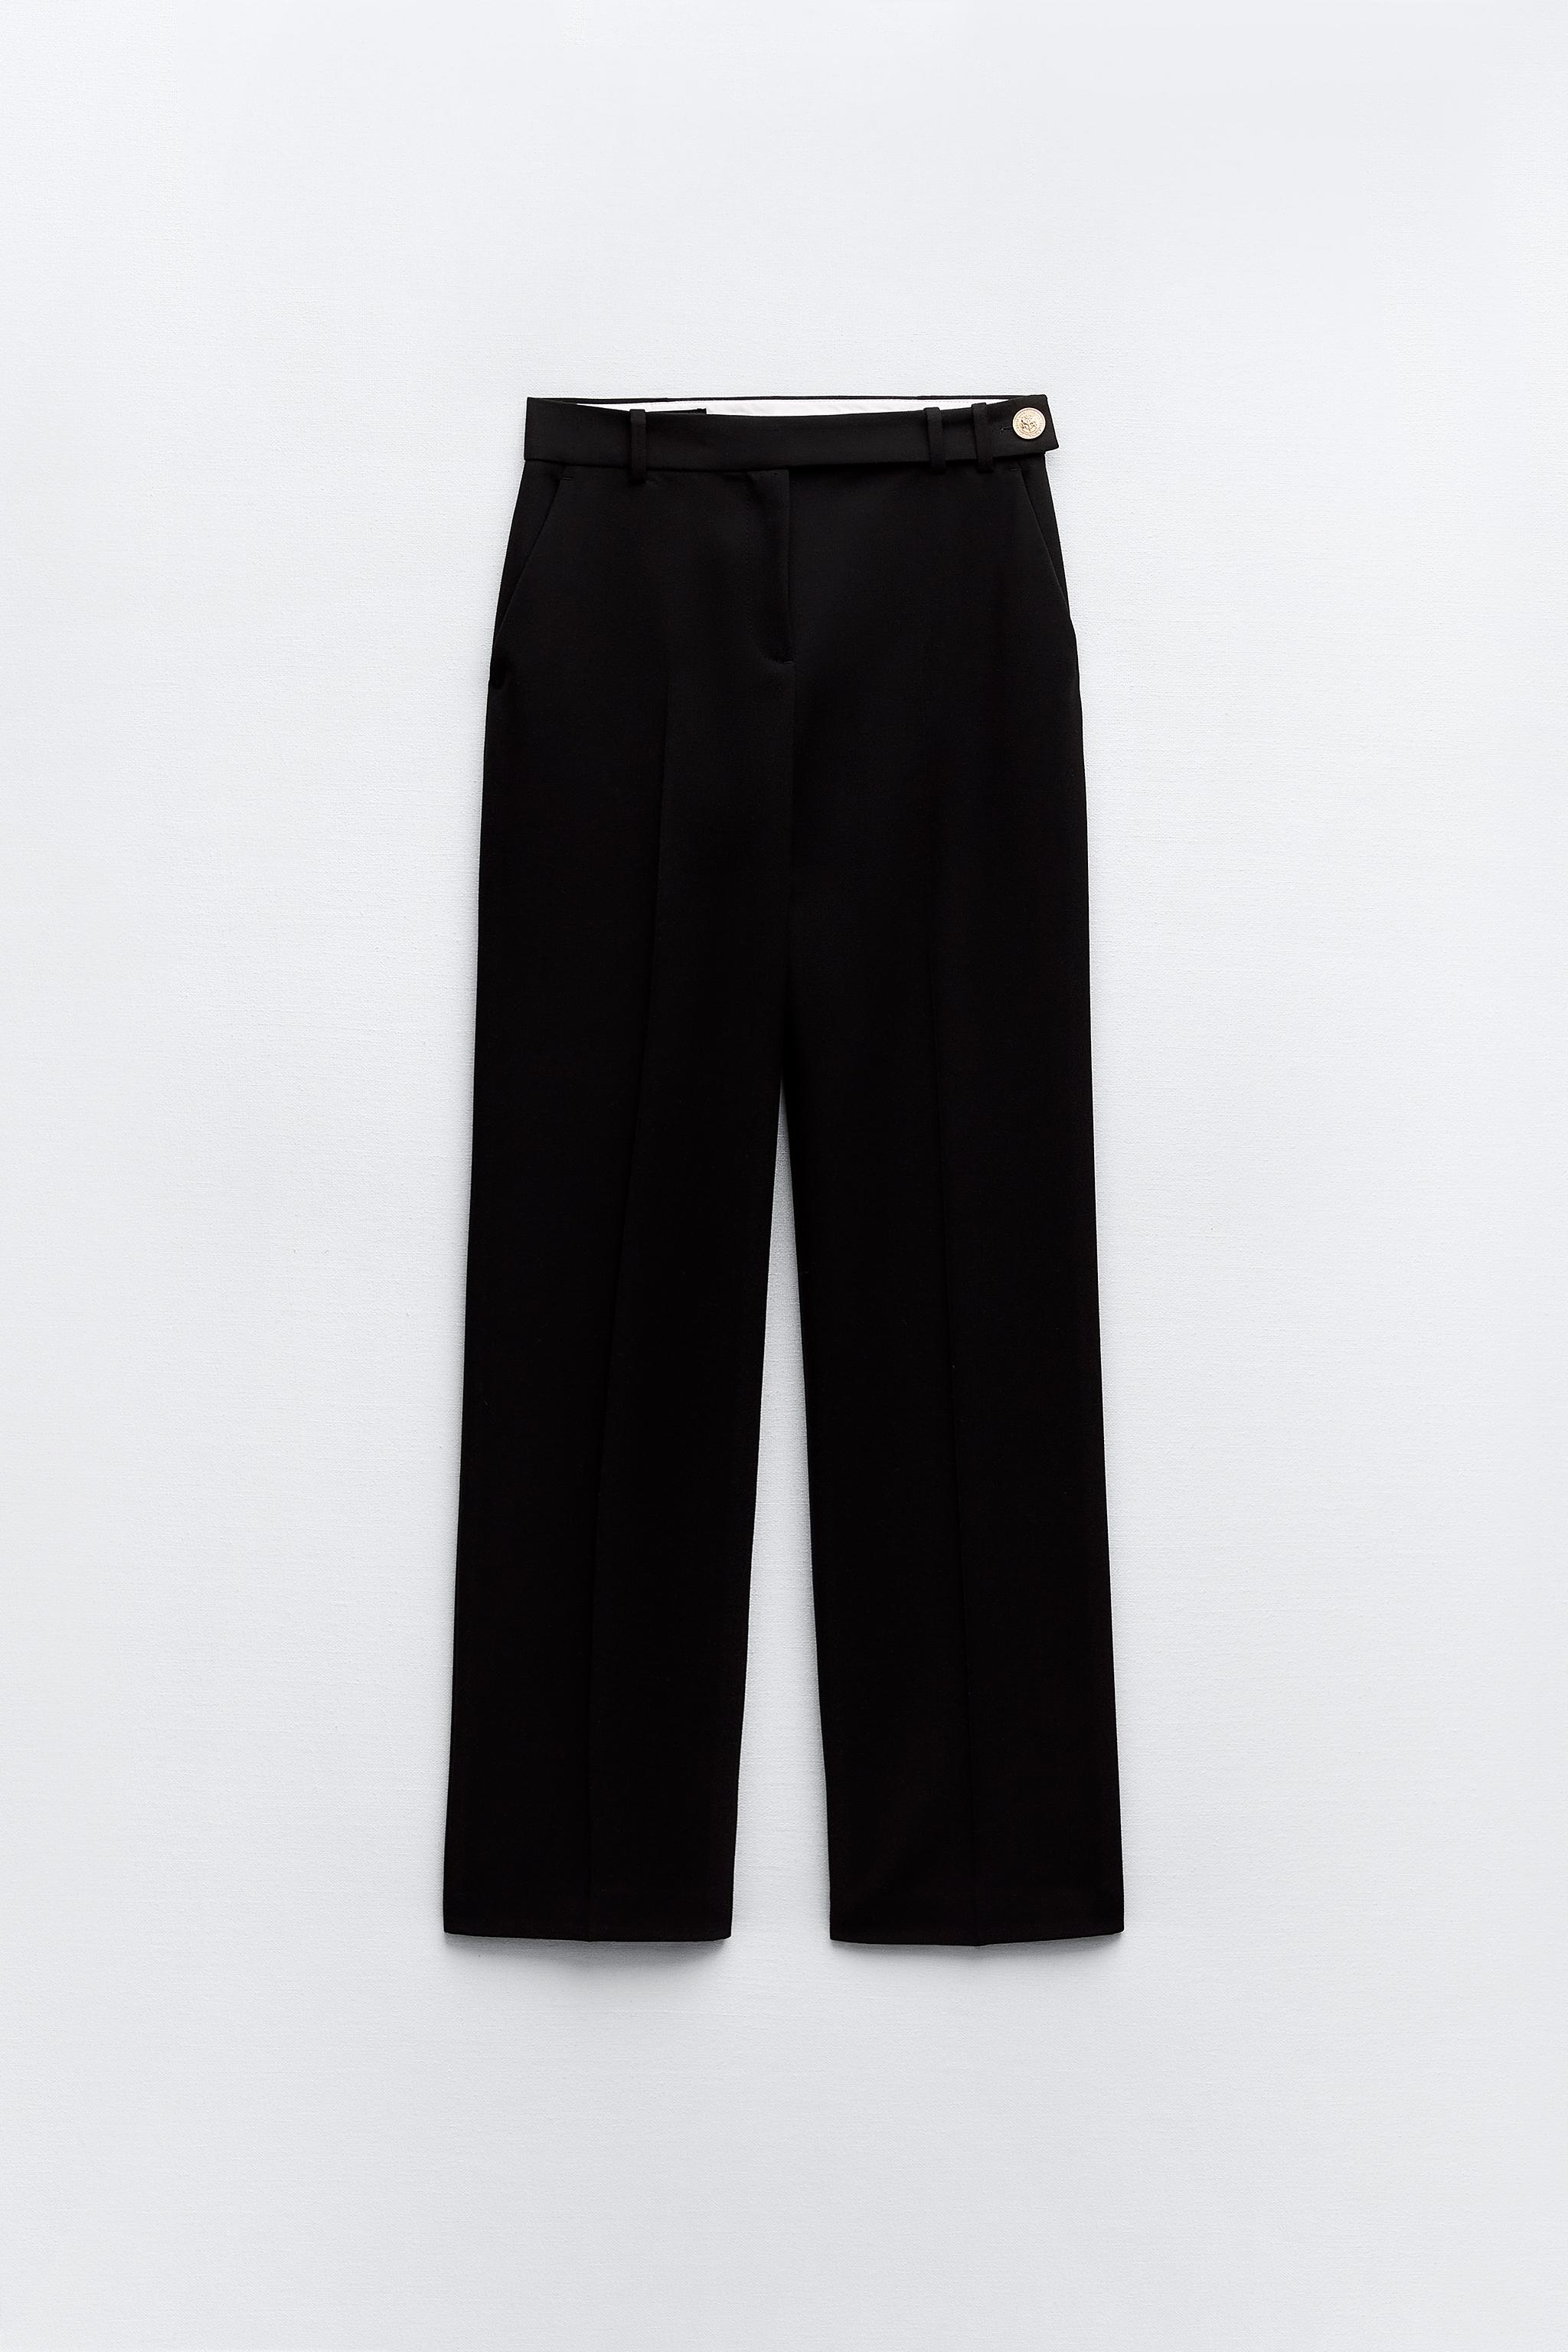 ✨🤍Elevate your style with the Zara High-Waist Pants! Crafted with pre